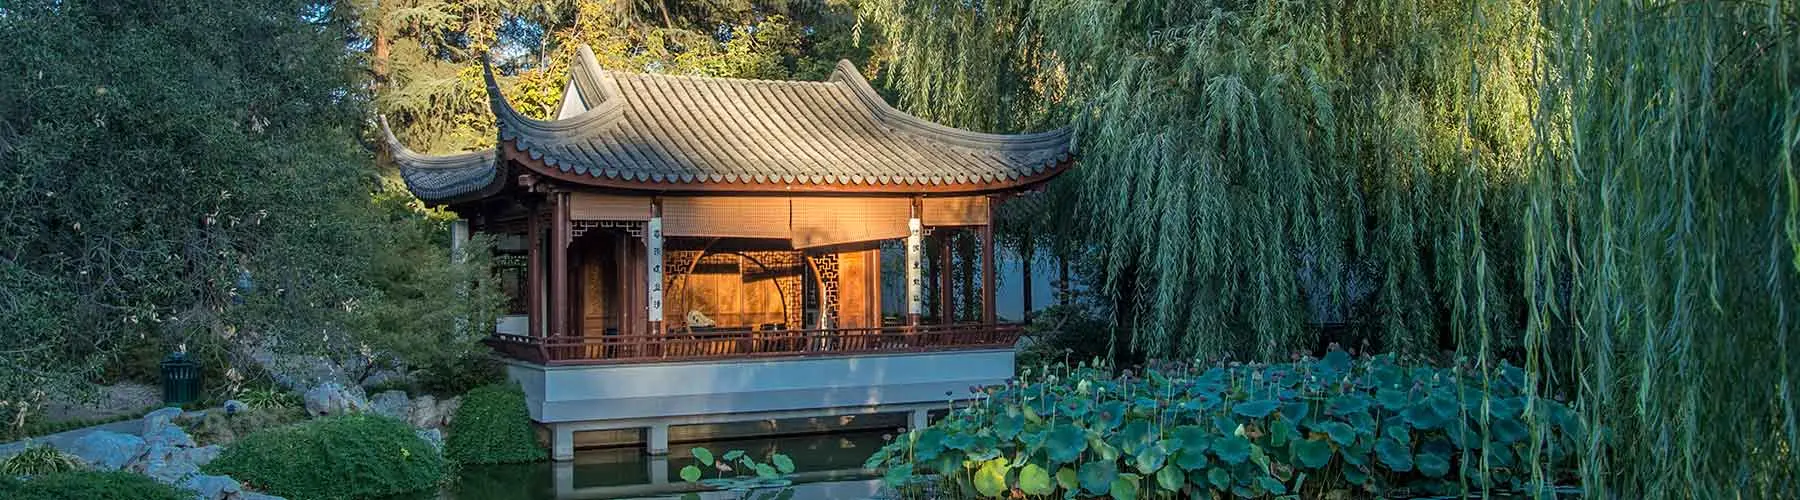 pavilion in the chinese garden